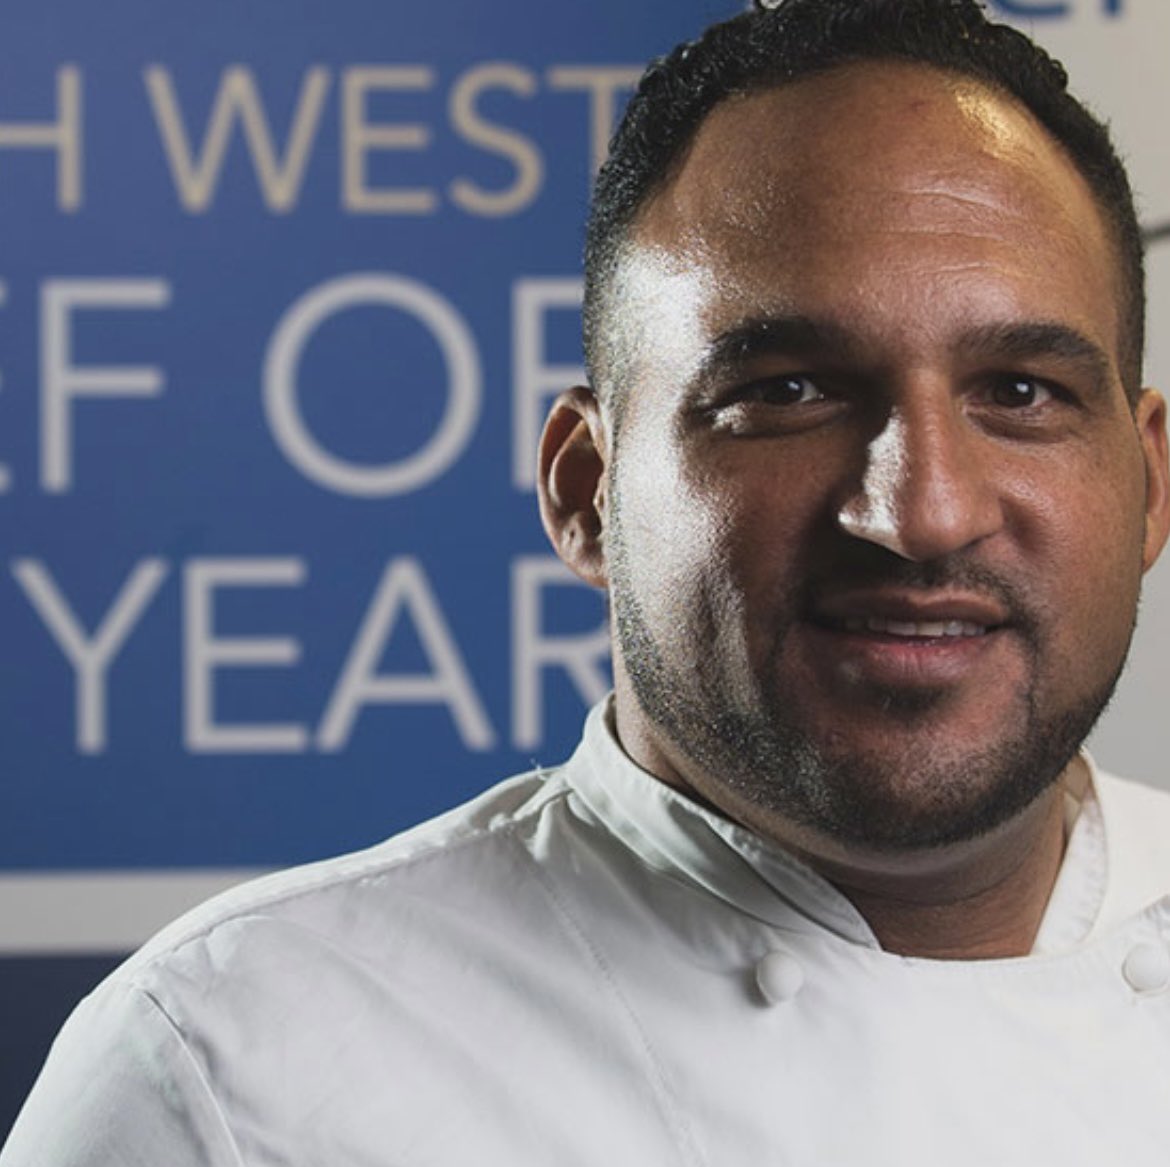 Entries are open for South West Chef of the Year 2023. ‘Taking part in South West Chef of the Year provides a wonderful opportunity for you to demonstrate your skills to some of the best chefs in the South West.’  Michael Caines MBE Co-founder southwestchef.co.uk @SWChefComp